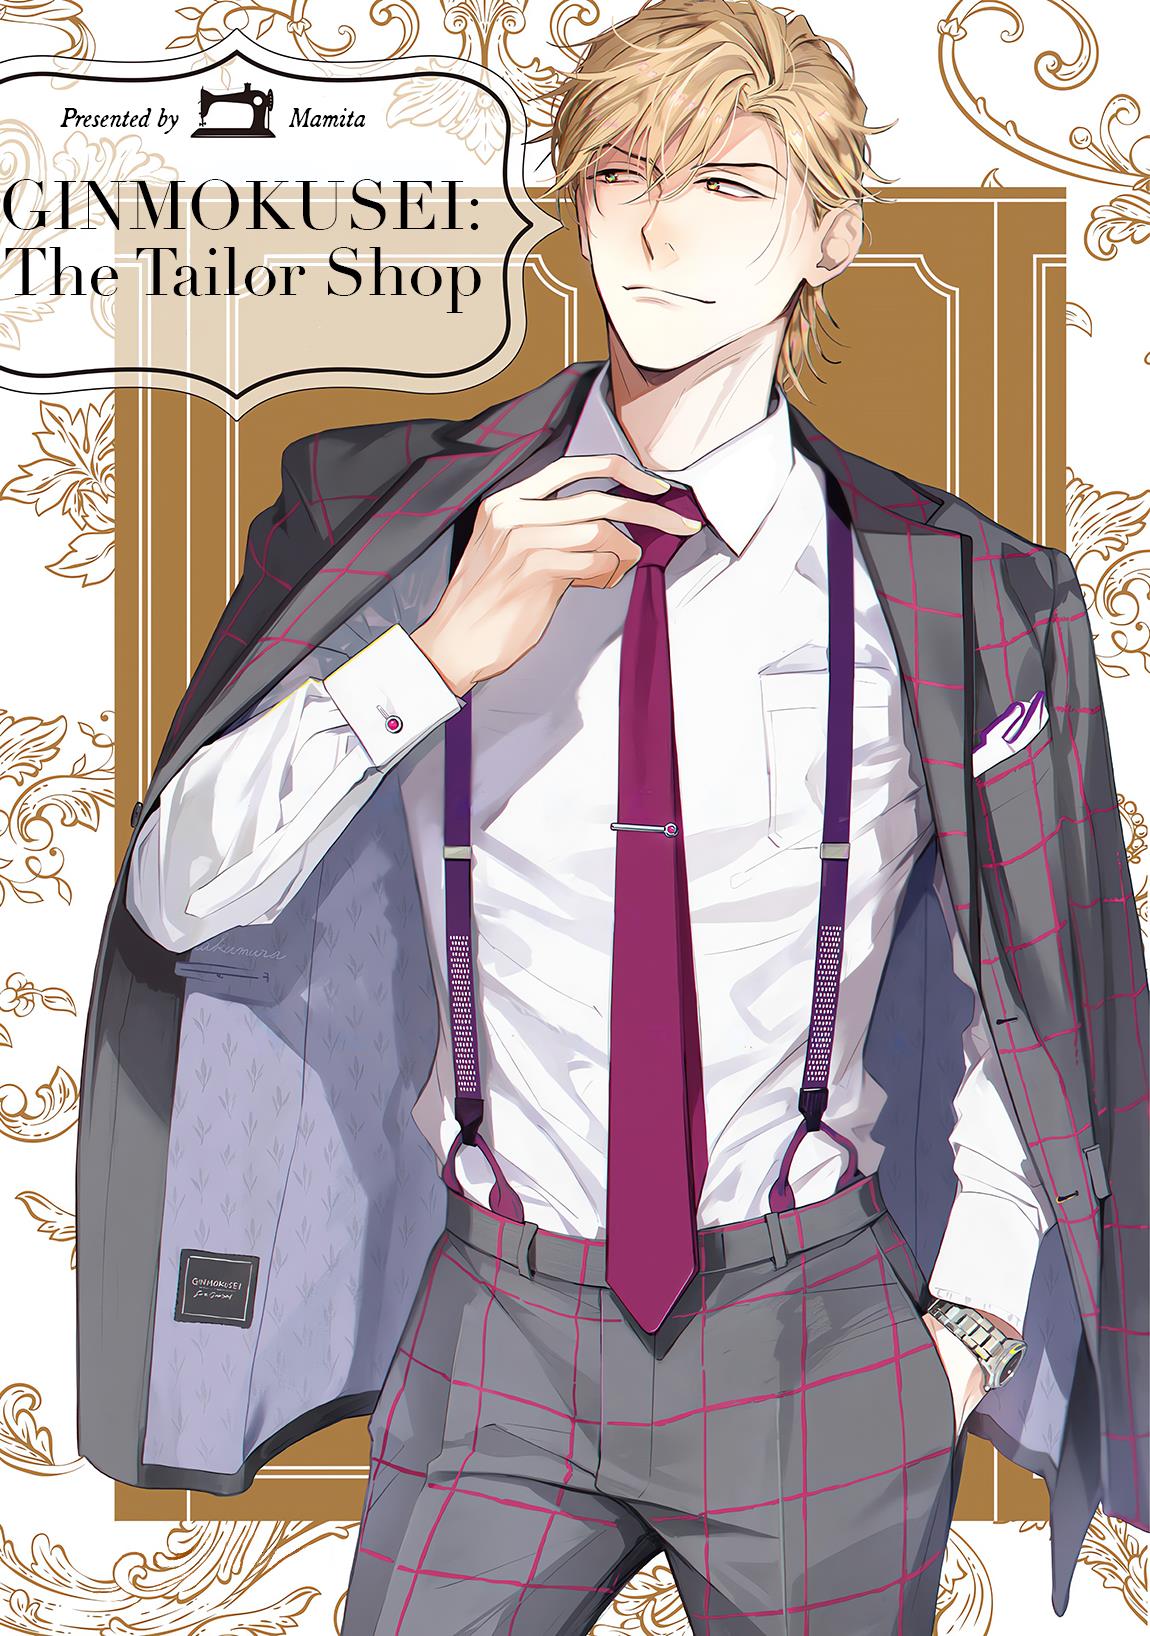 Ginmokusei: The Tailor Shop Vol.2 Chapter 8.5 - Picture 3